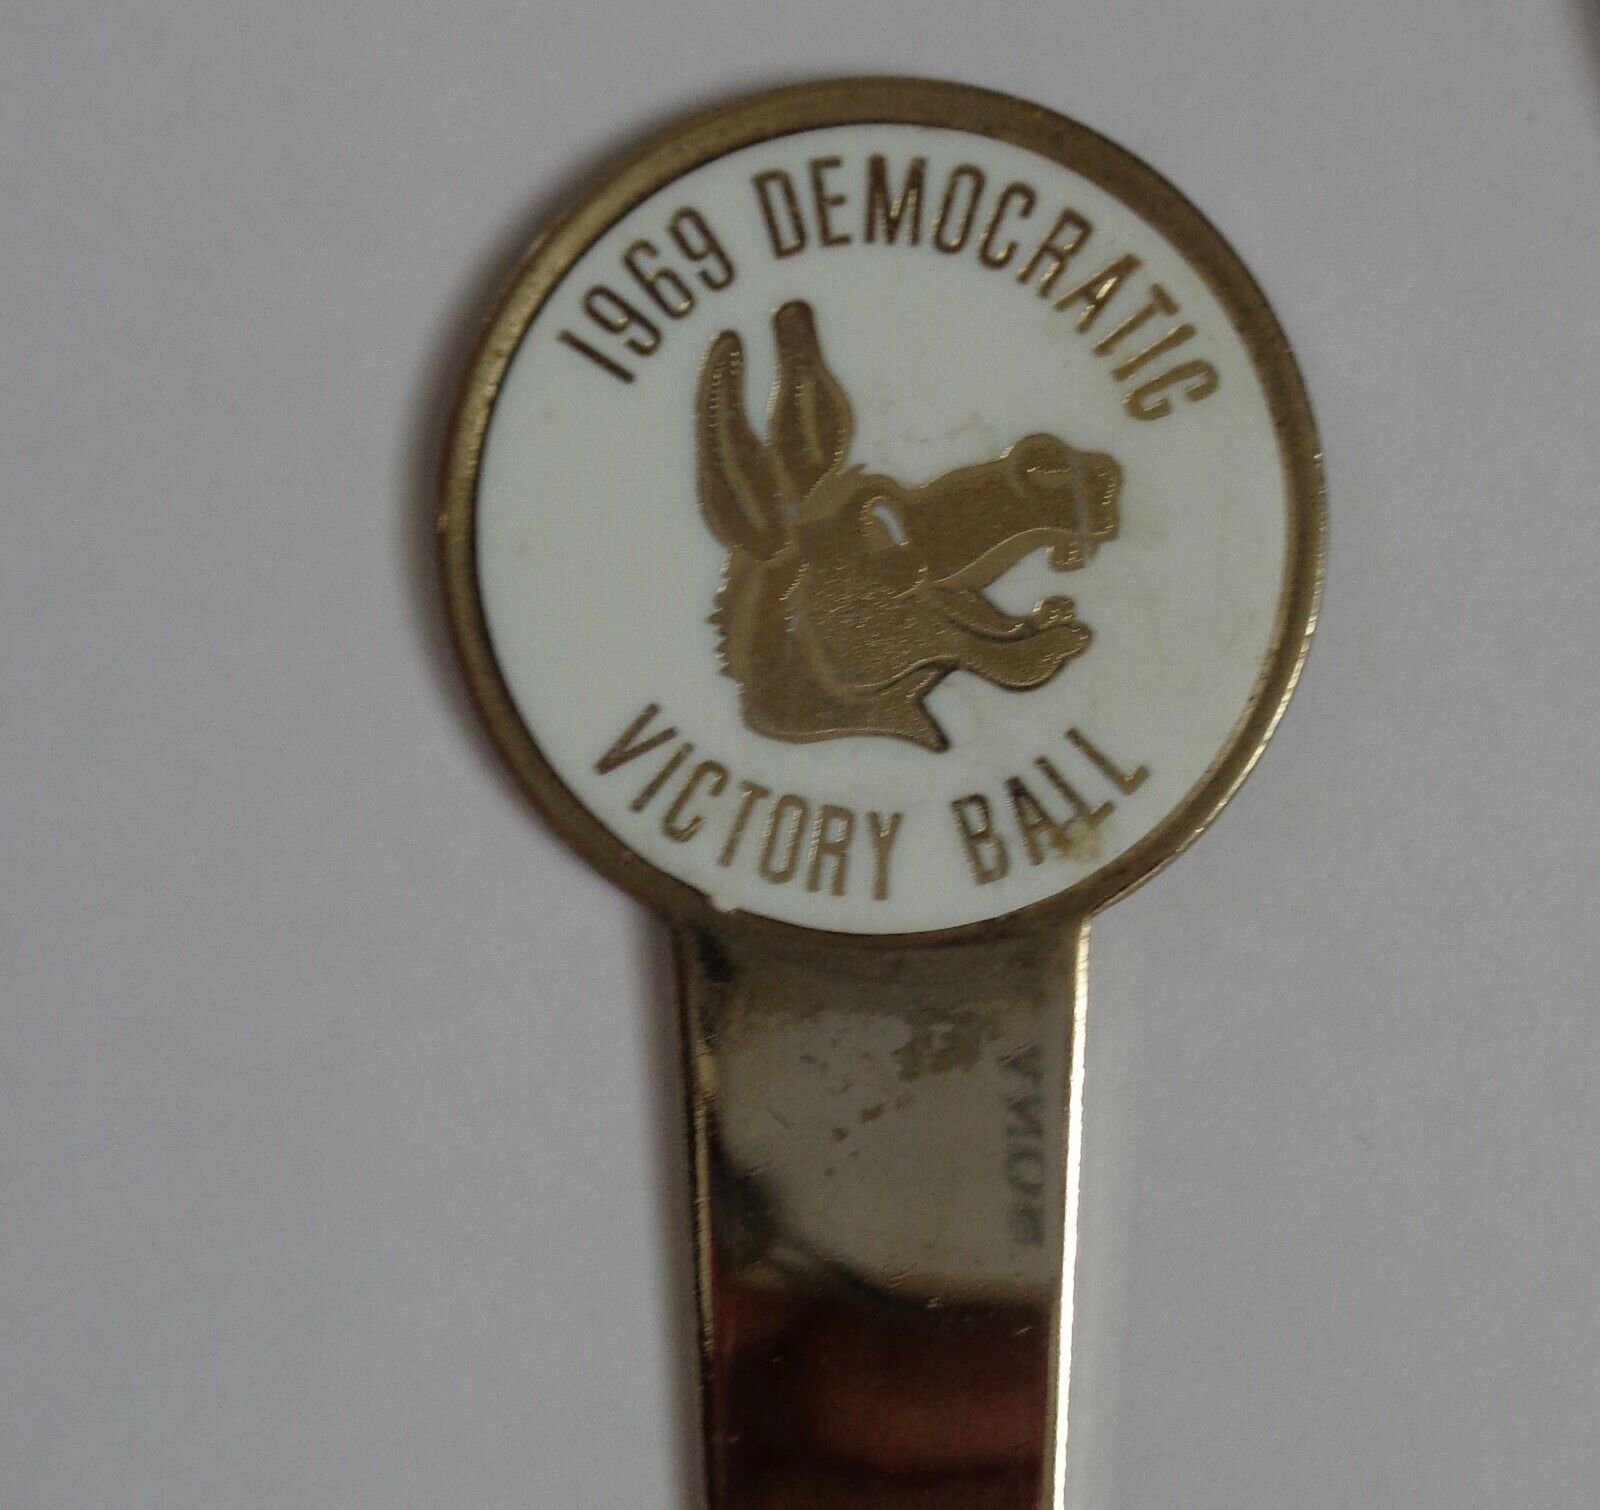 1969 Democratic Victory Ball Brass Letter Opener with case